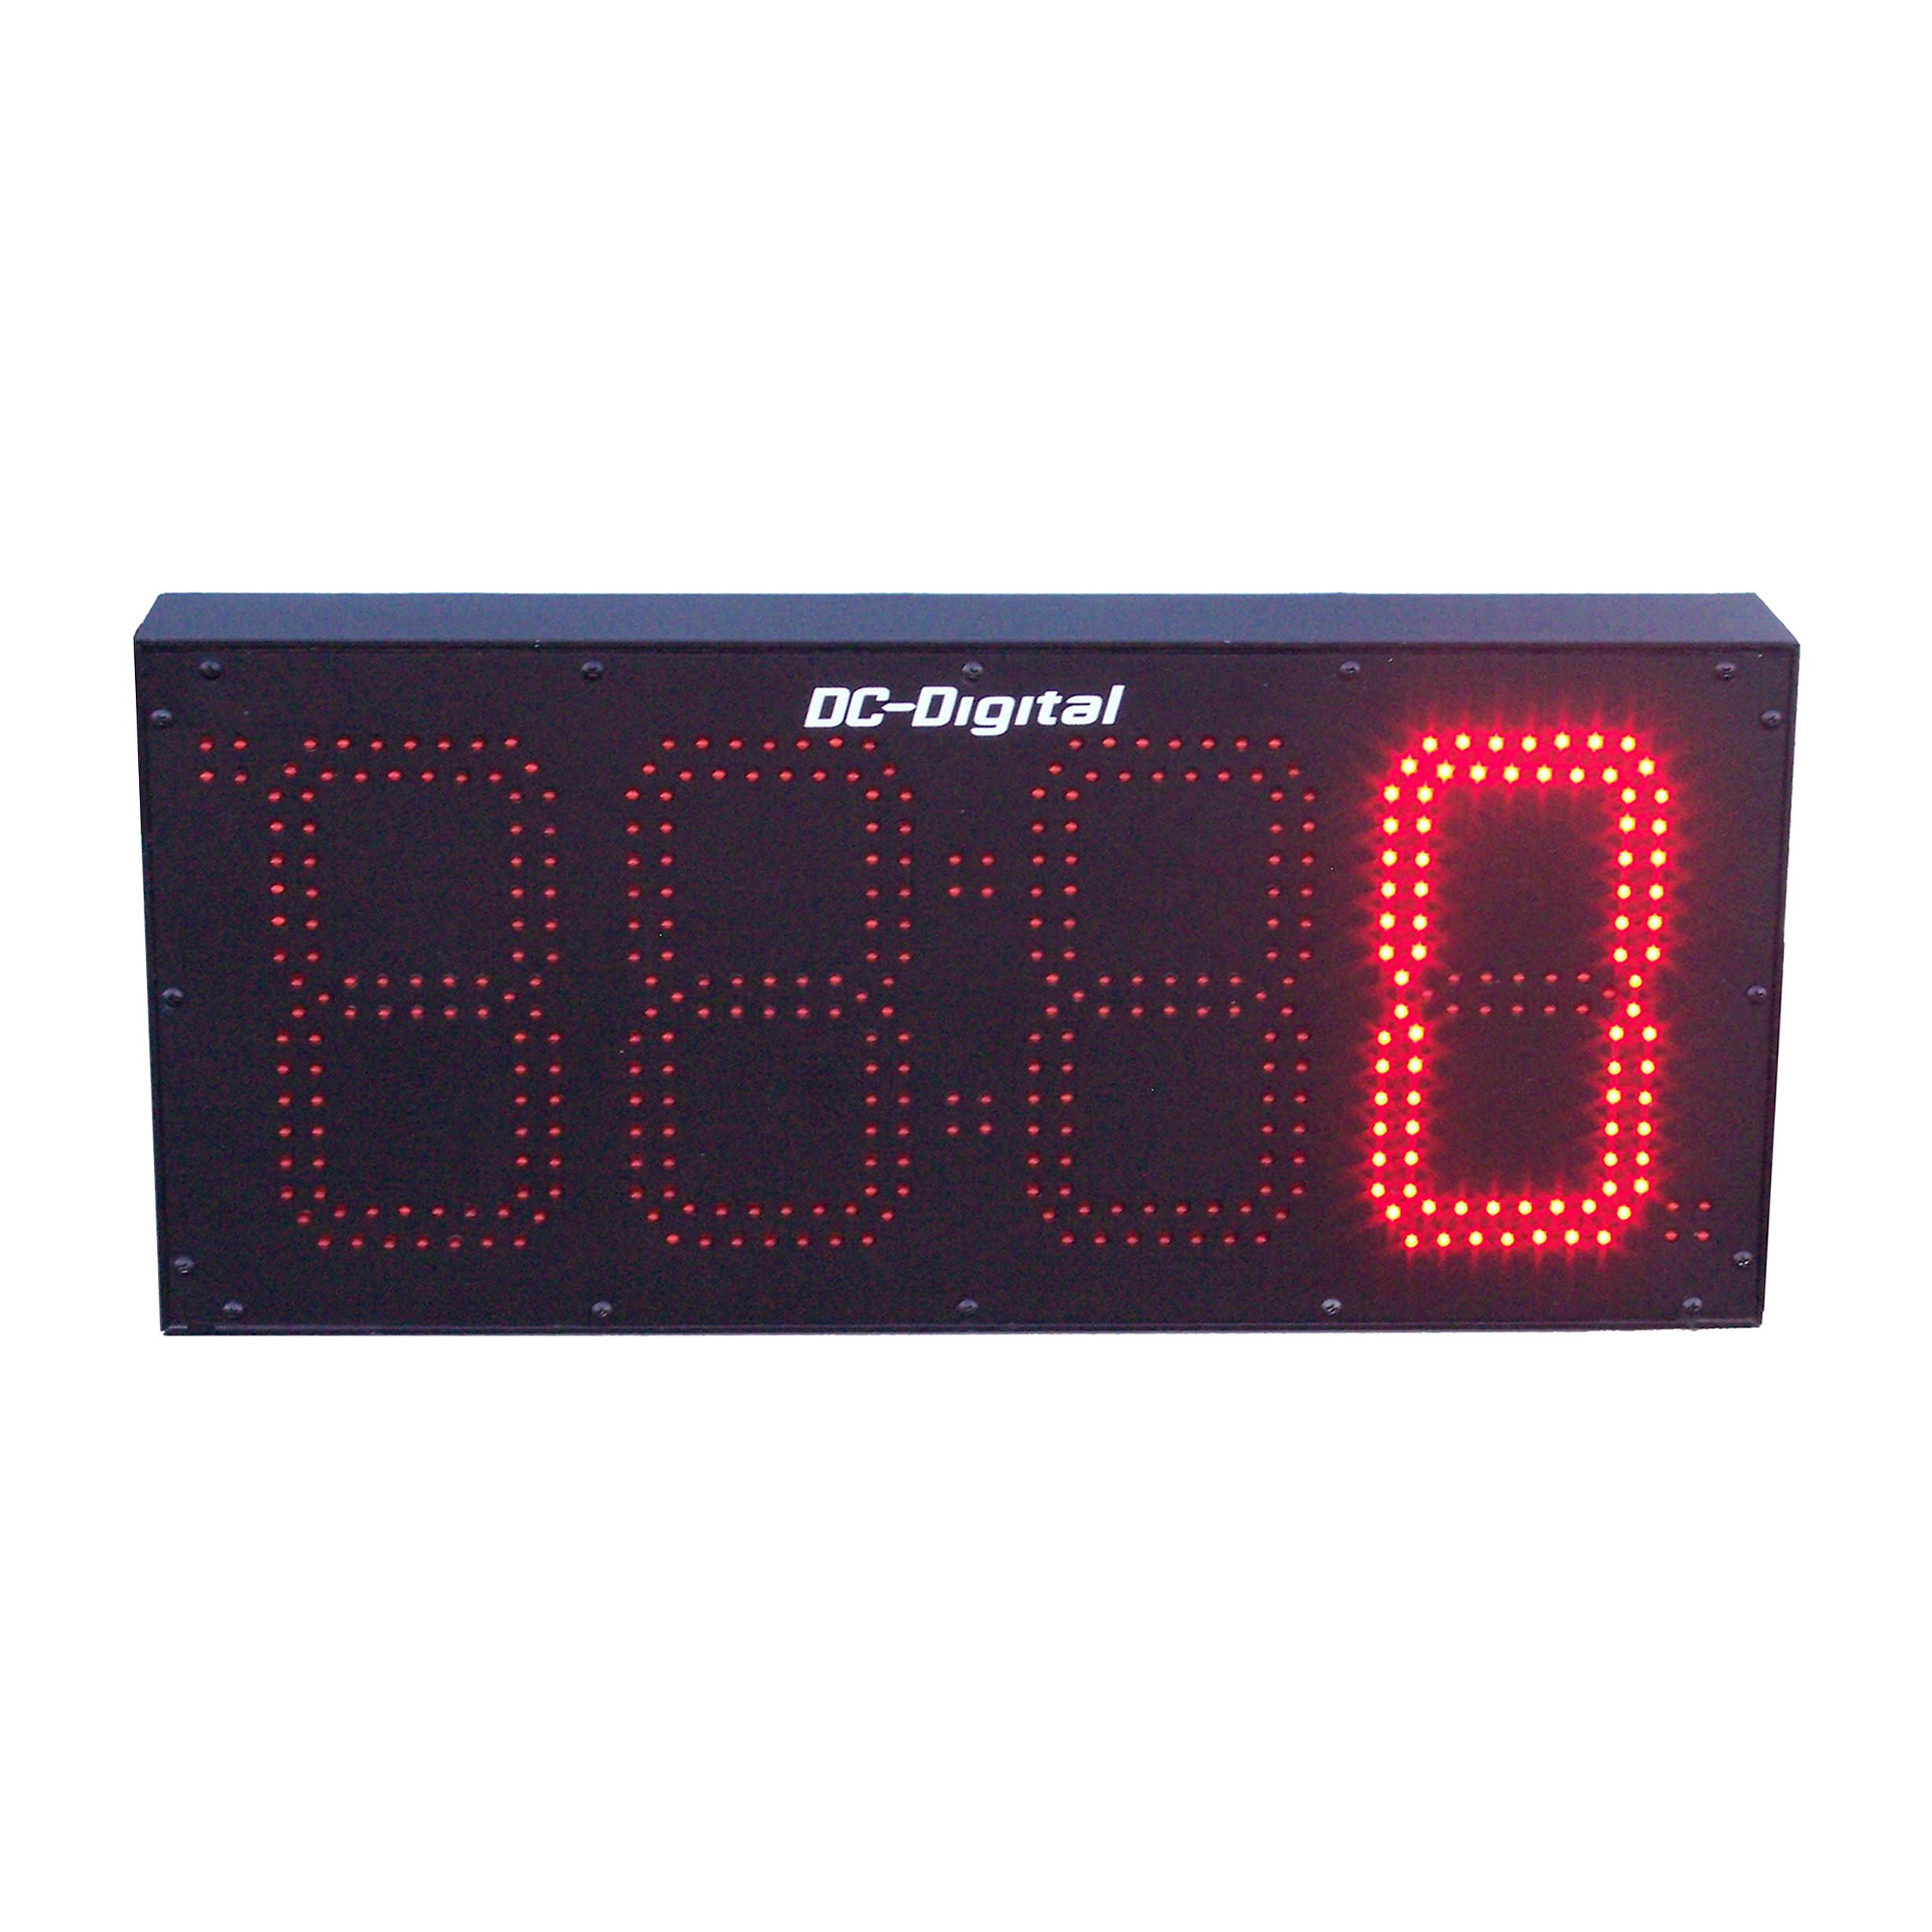 (DC-80T-UP-DAYS) 8.0 Inch LED Digital, Environmentally Sealed Push-Button Controlled, Count Up by Days Timer (OUTDOOR)